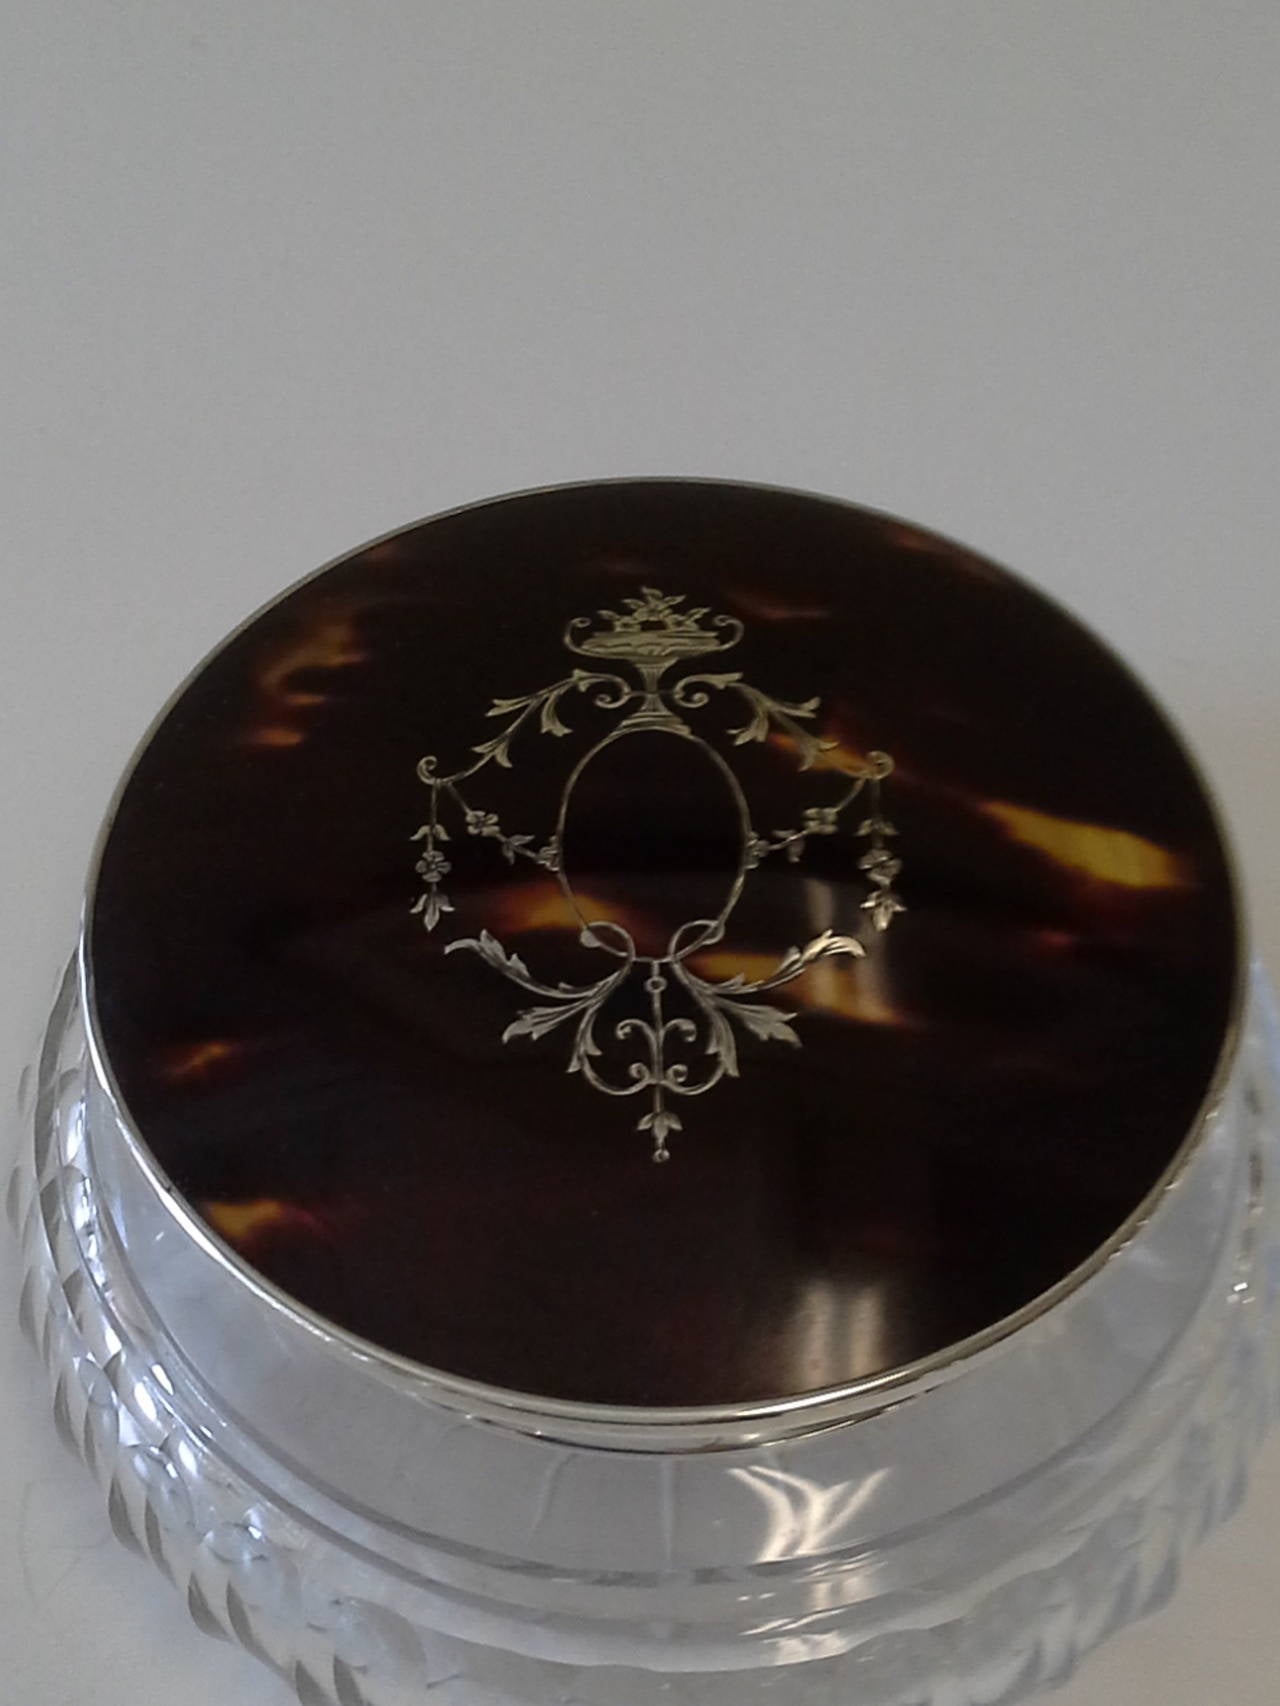 English Tortoiseshell & Sterling Silver Powder Jar with Inlaid Top, Hallmarked for Birmingham 1926, and marked Sterling silver, Made in England. The Bottom is a clear glass jar. The jar is 2 1/2"-inches high and 4 1/4"-inches in